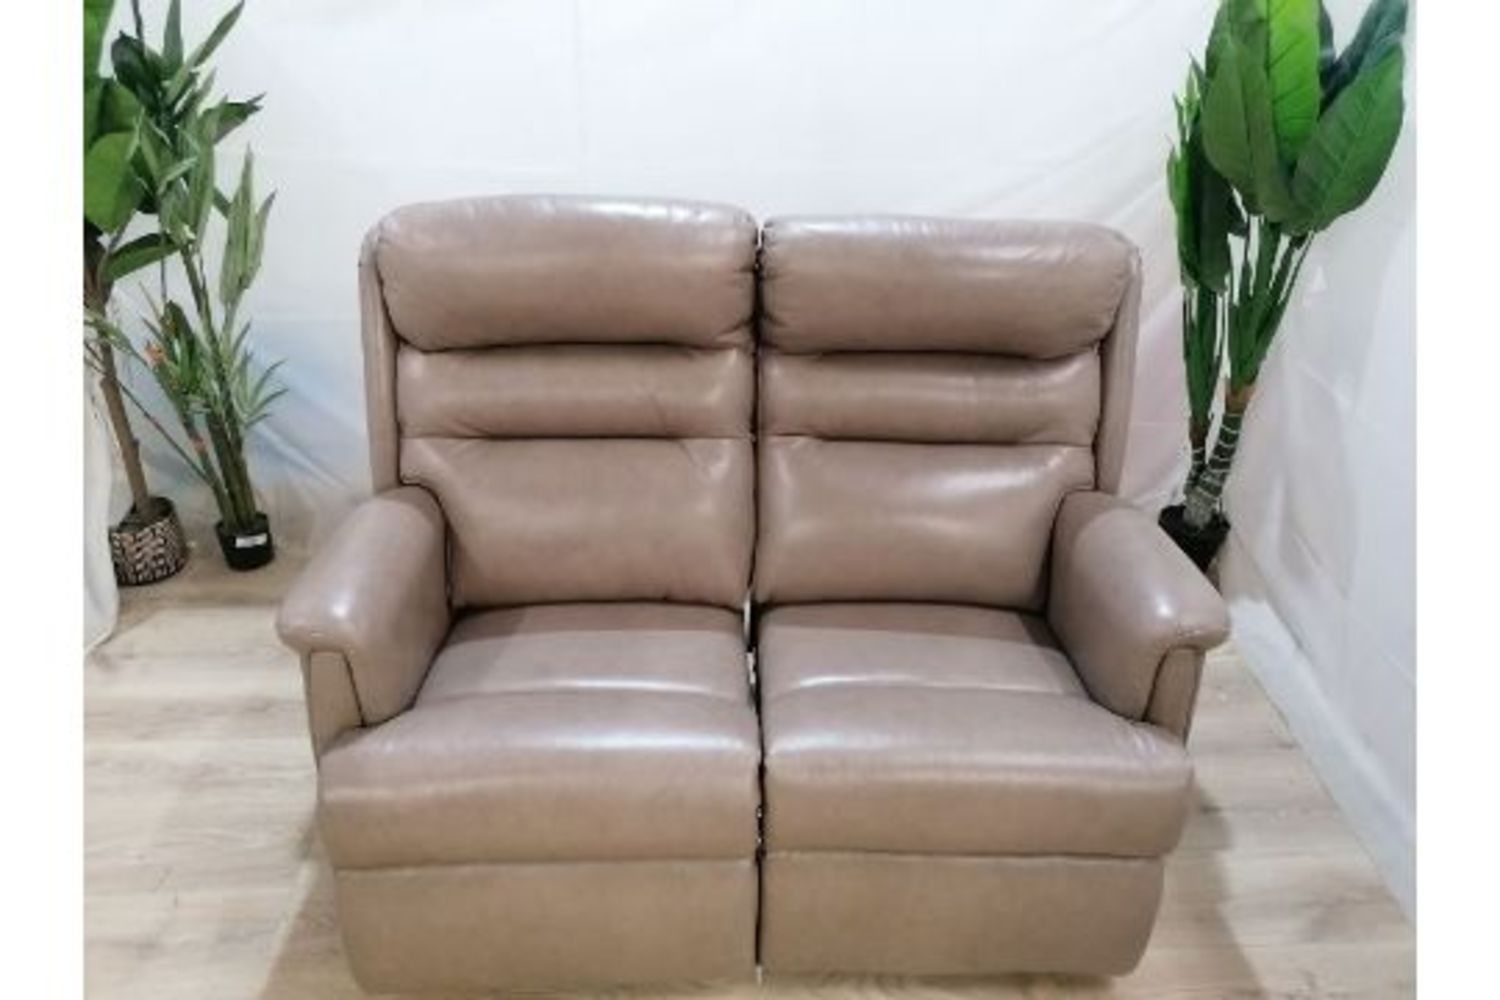 Sofas & Chairs Auction only 10% buyer premium from Swoon, Heals, Oak Furnitureland, Costco and more